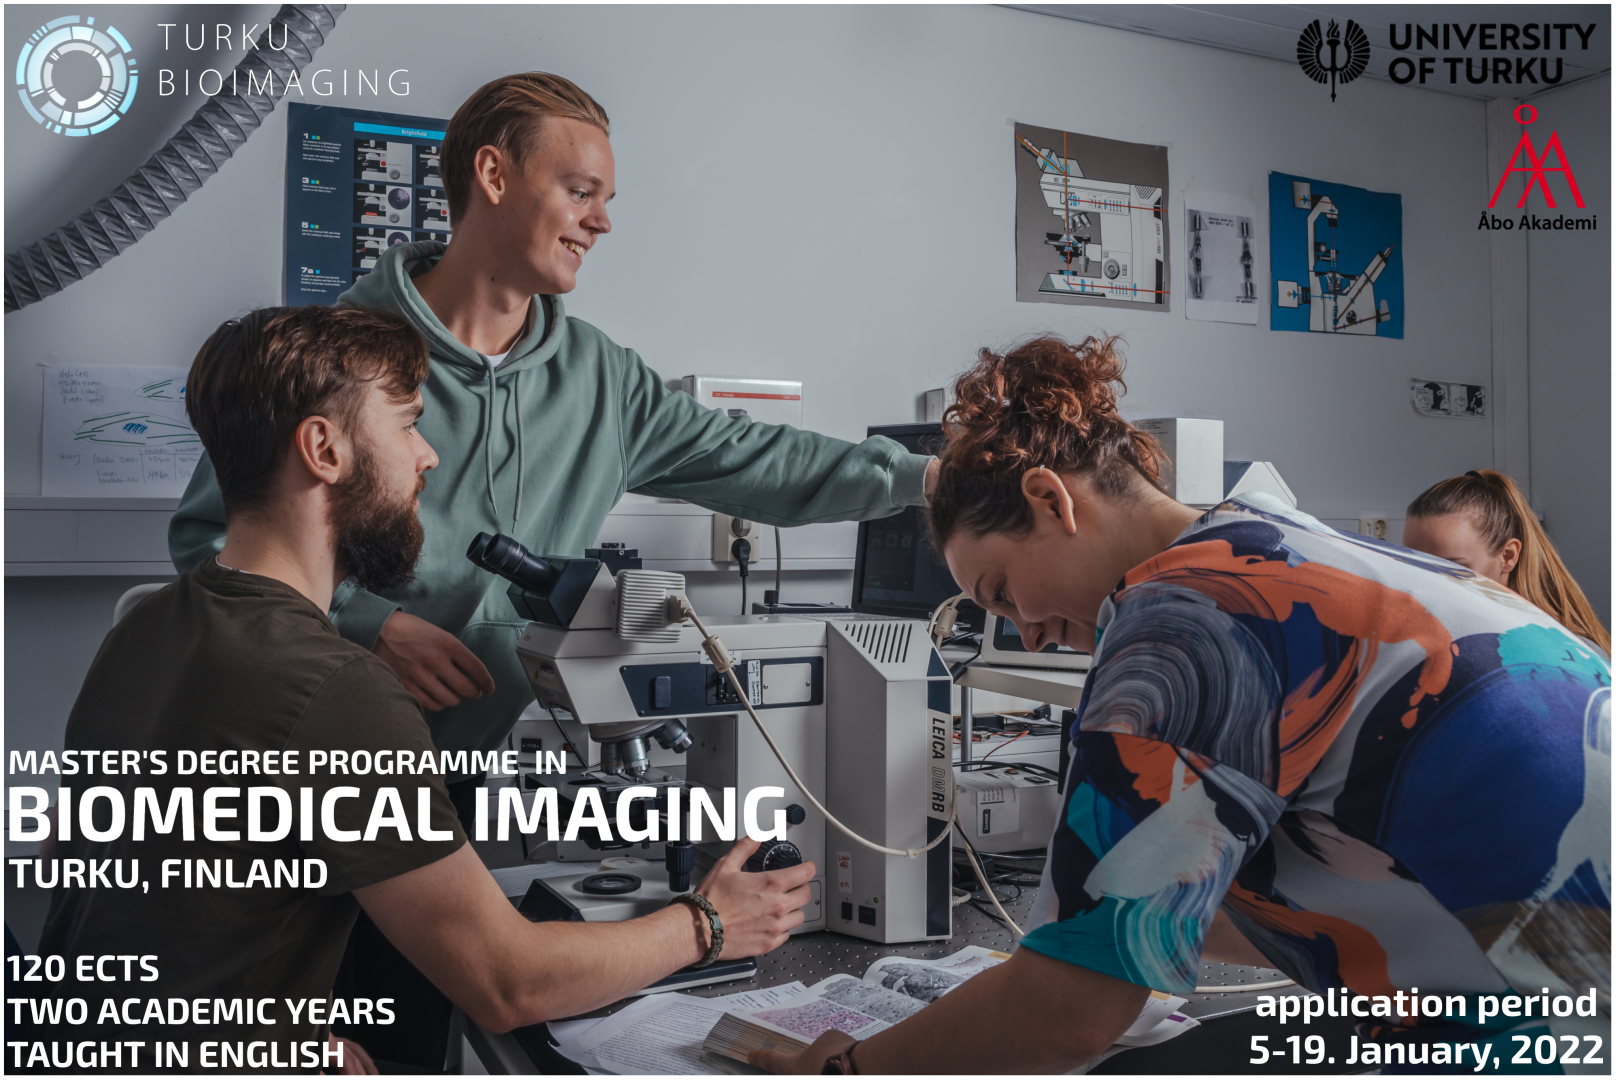 Biomedical Imaging Master’s Progamme Application period for 2022/2023